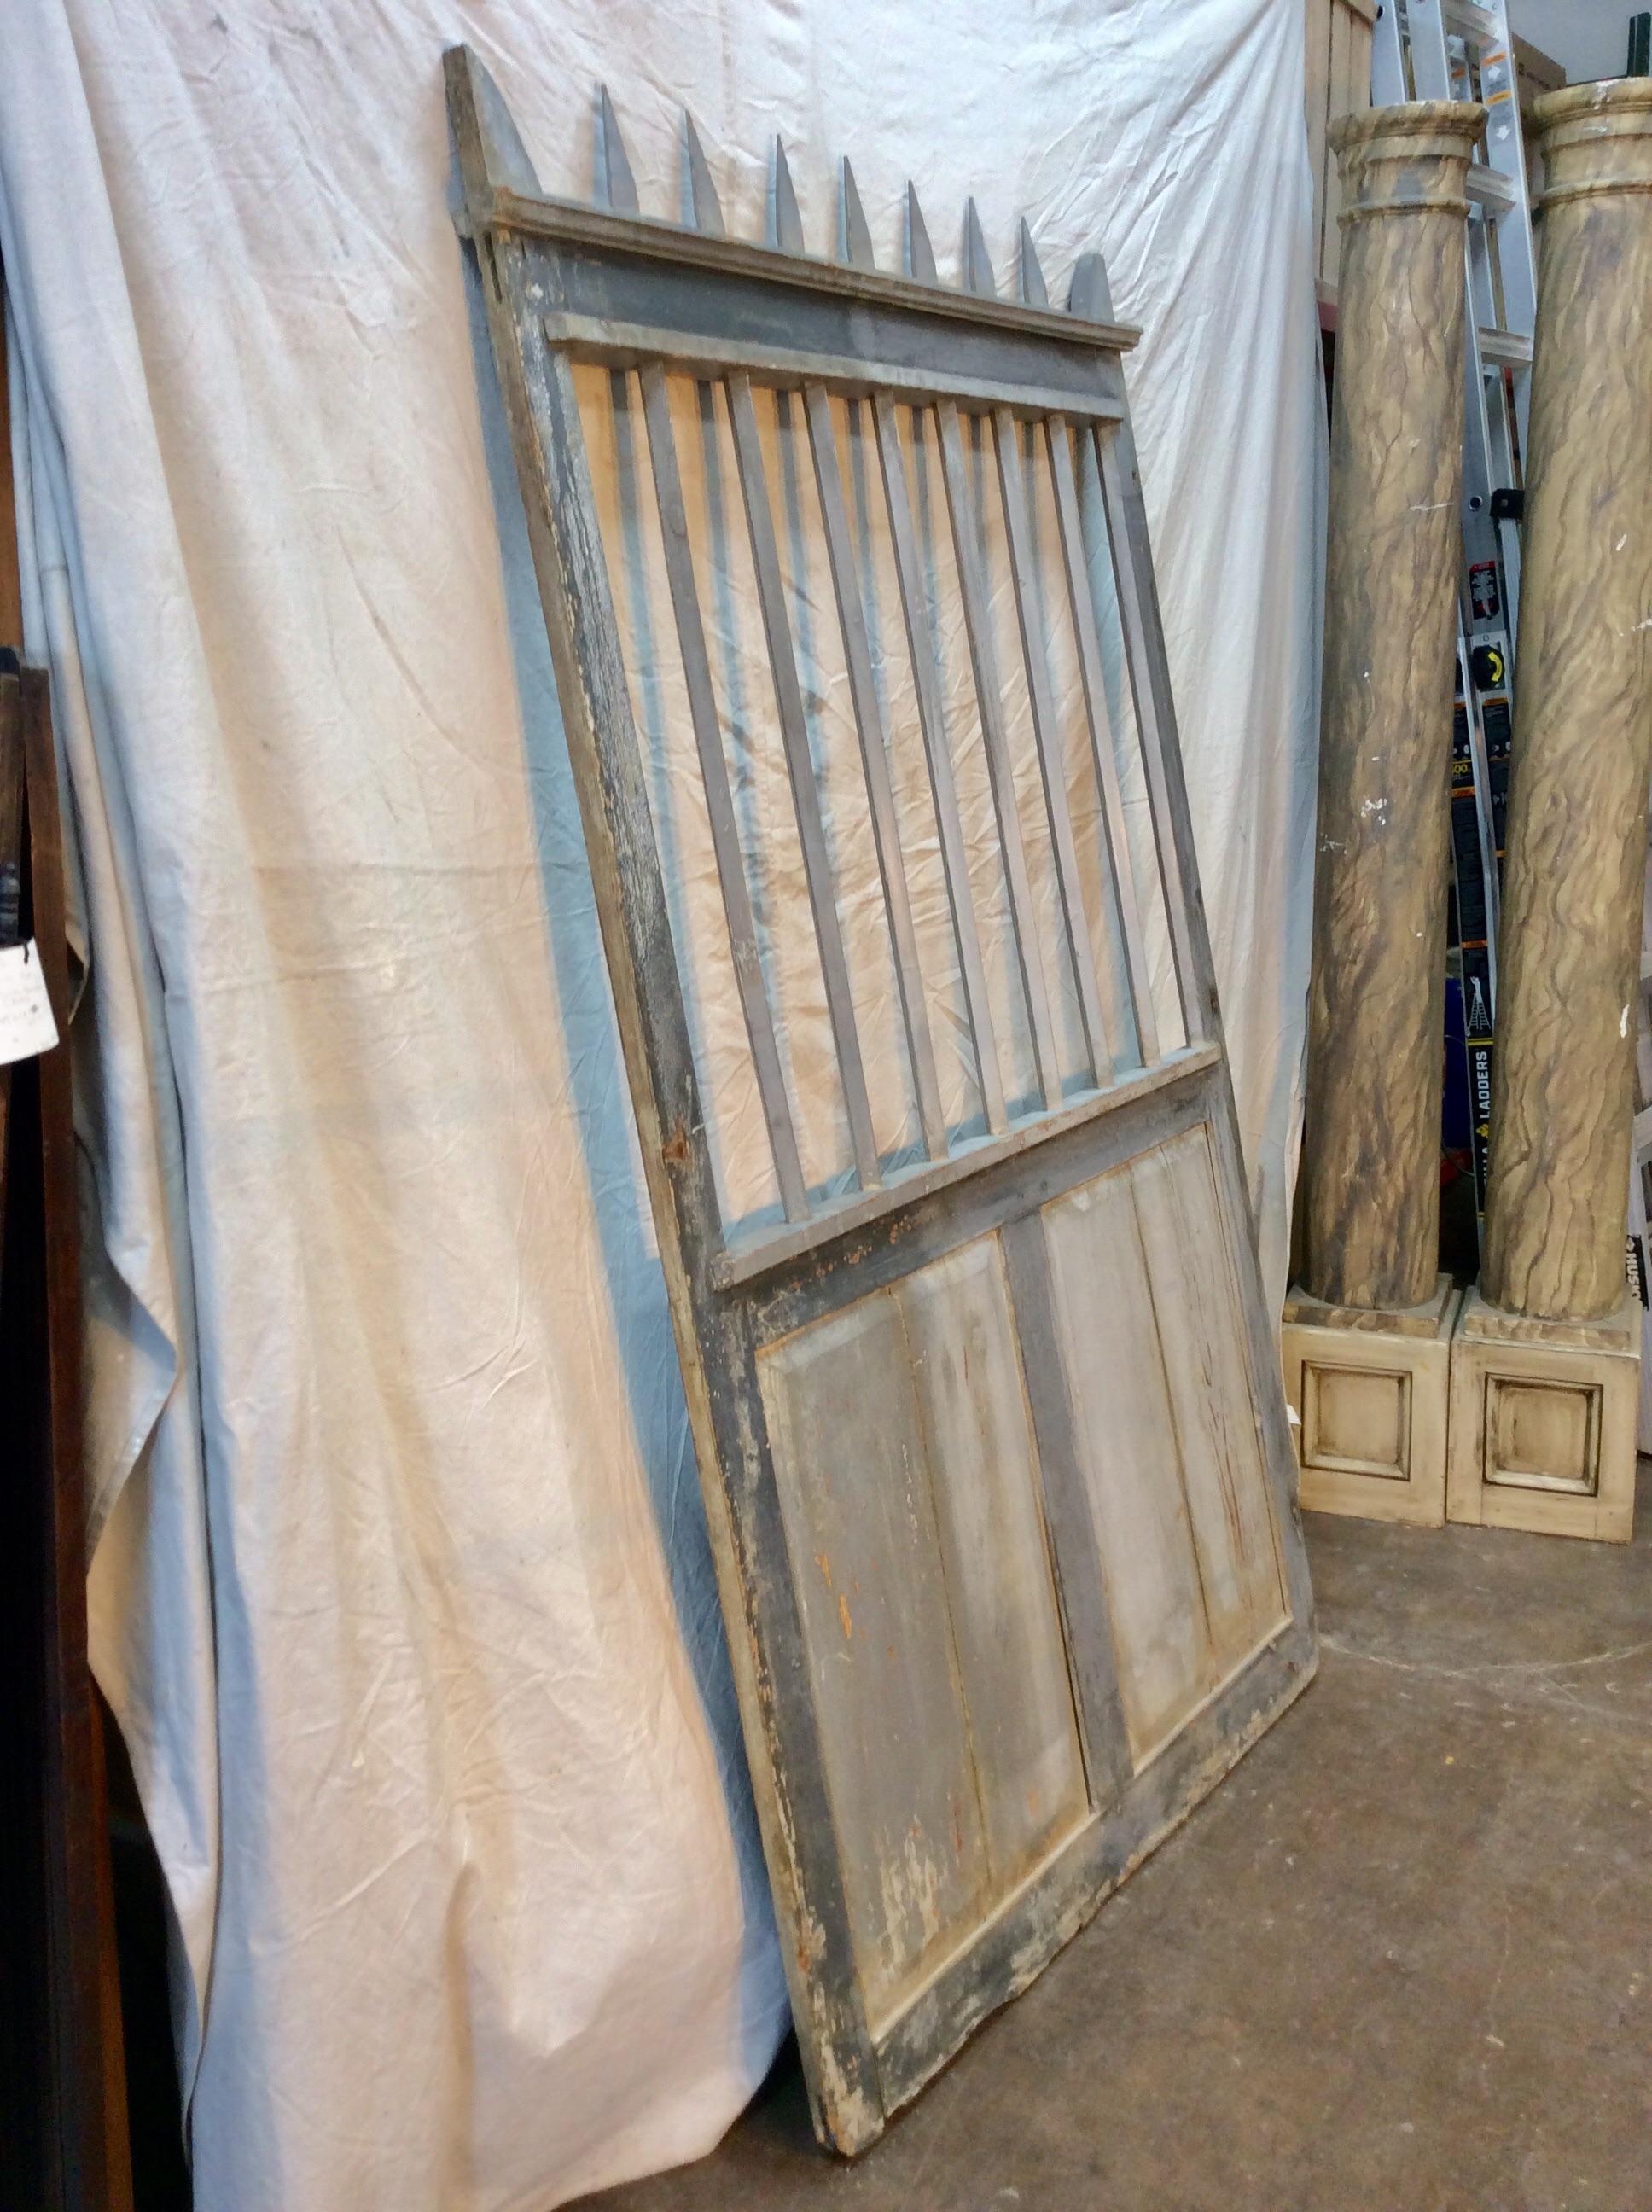 Found in the South of France, this Early 20th Century French Wood Gate is crafted with a solid bottom panel and bars at the top that end in a pointed fashion. Featuring a warm painted patina in French blues and grays, this piece could be used